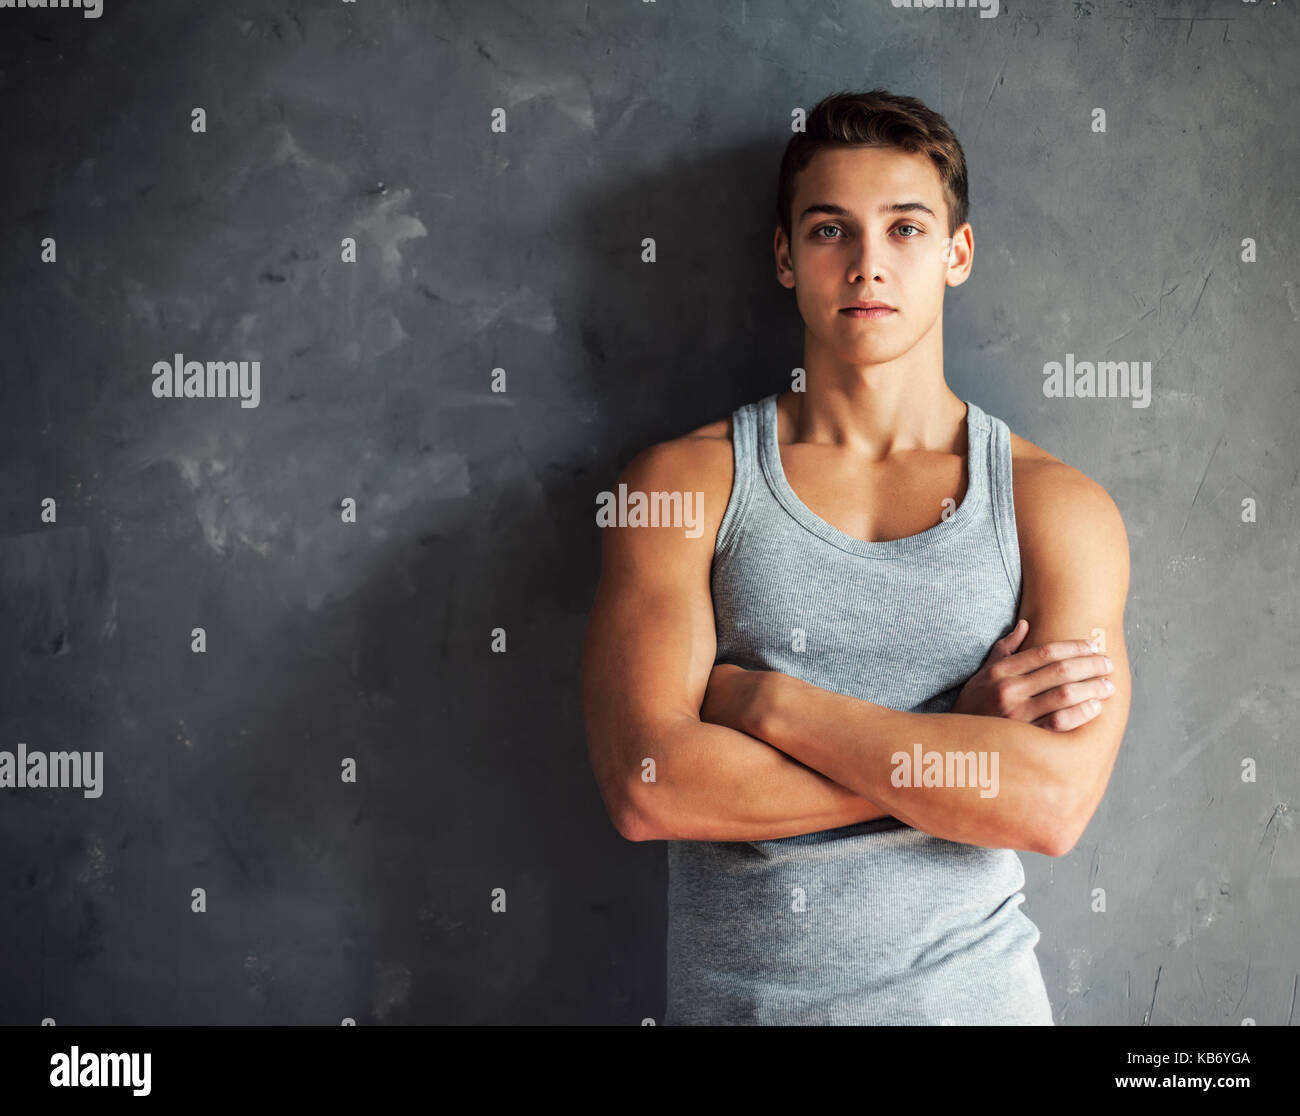 Portrait of muscular young handsome man wearing a gray undershirt against gray textured wall Stock Photo